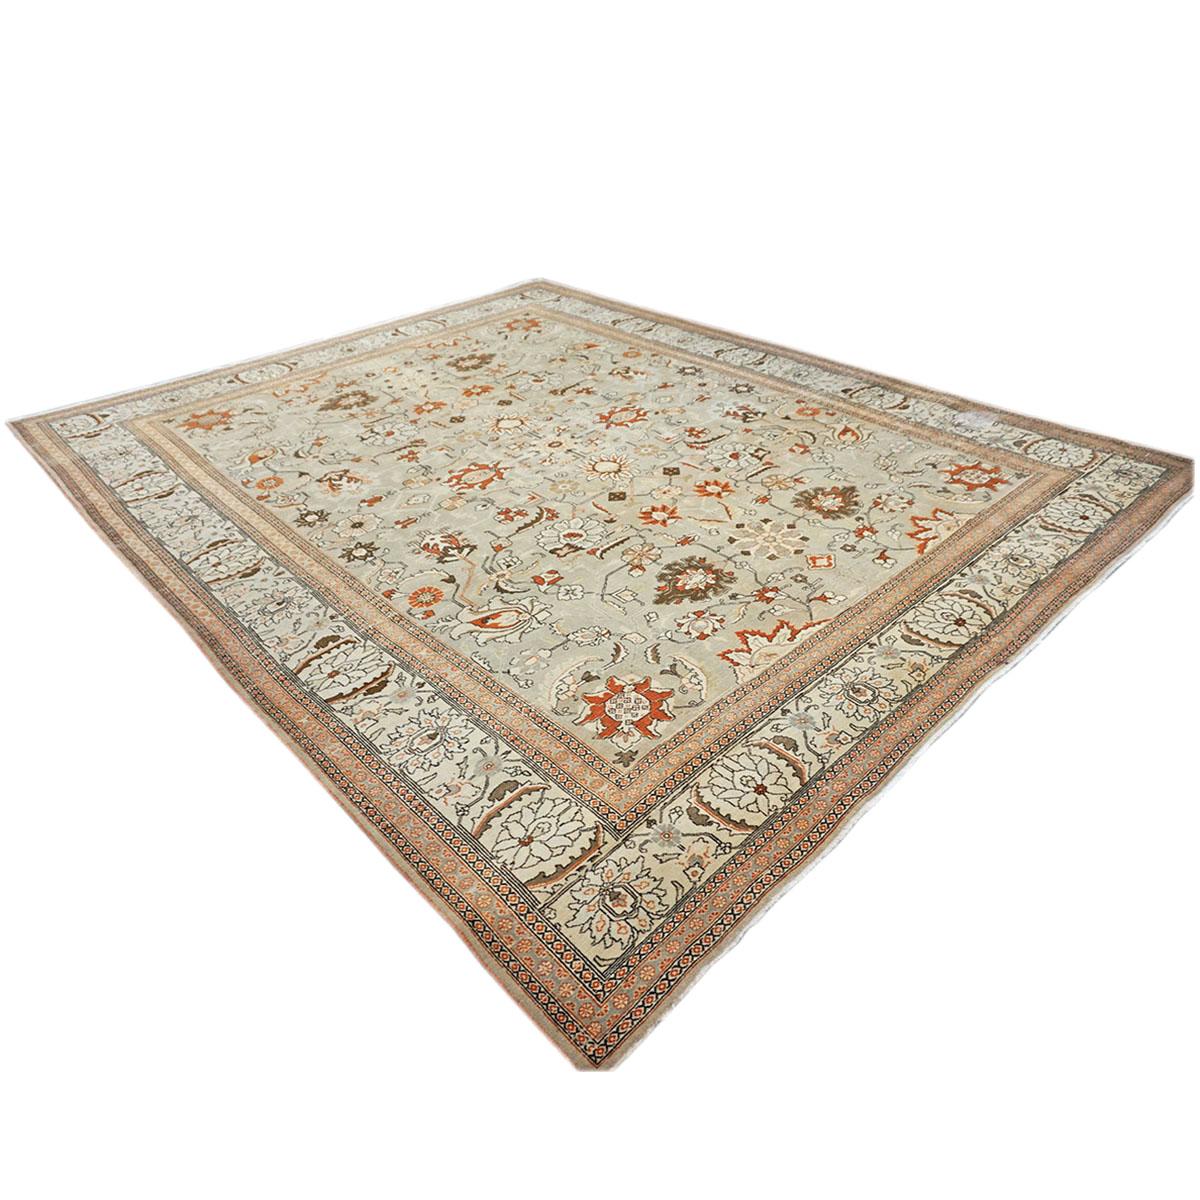 Early 20th Century Antique Persian Tabriz 10x13 Tan, Ivory & Rust Handmade Area Rug For Sale